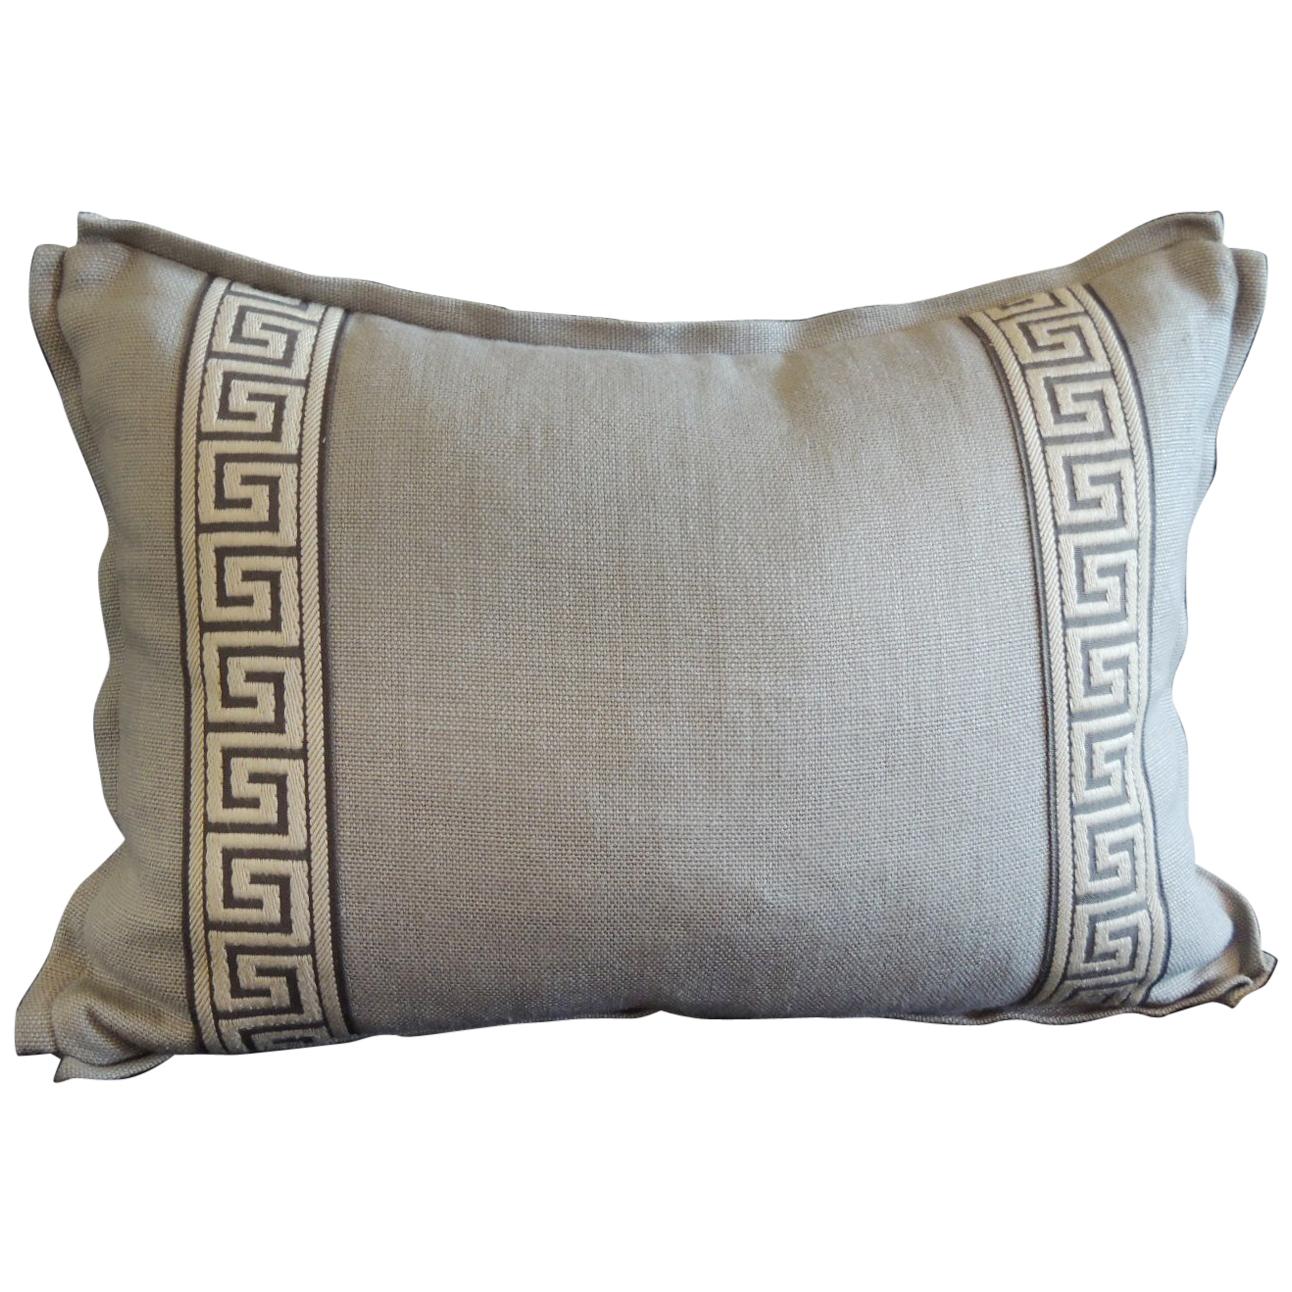 Gray and Blue with Greek Key Trim Decorative Linen Bolster Pillow